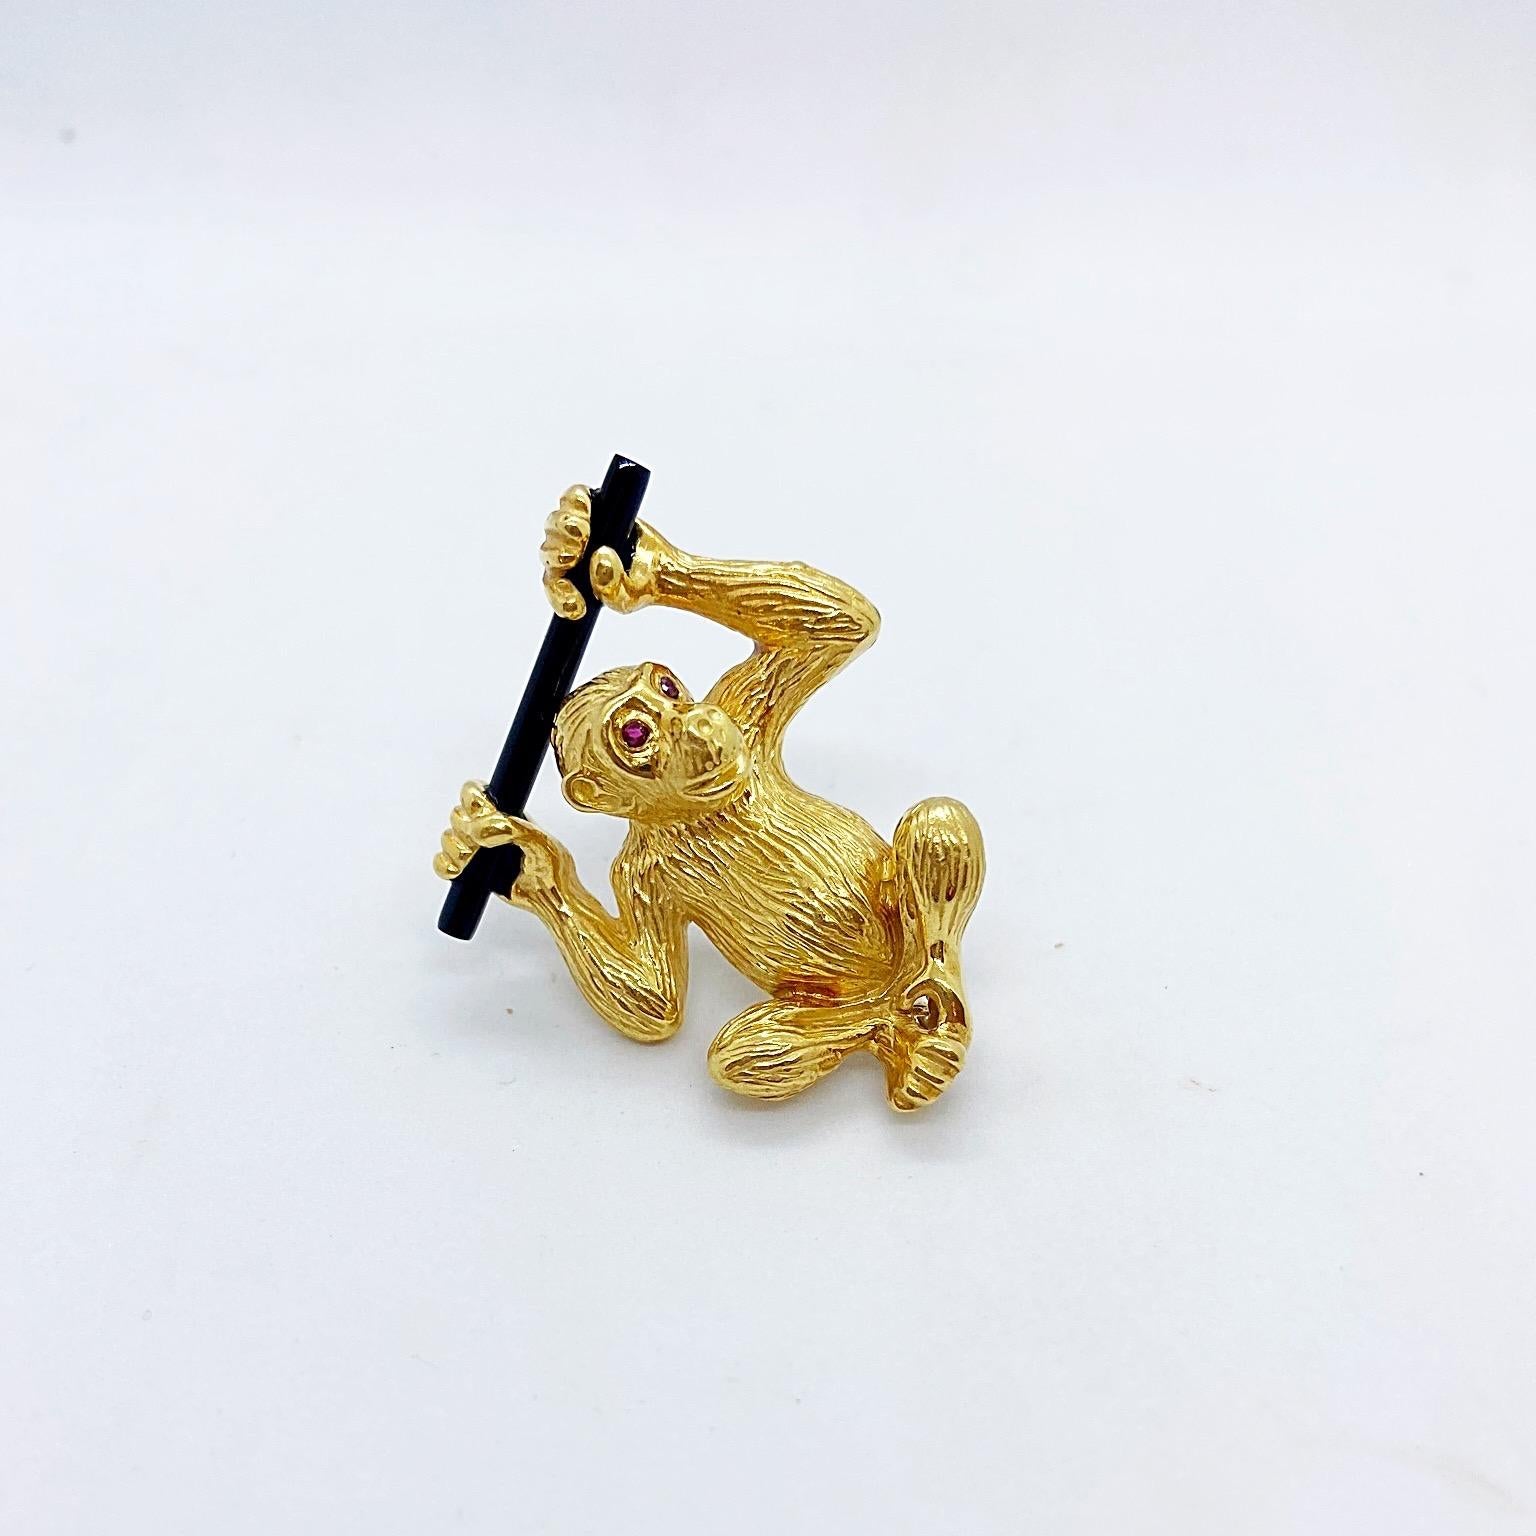 An adorable 18 karat yellow gold monkey with ruby eyes,hangs from a branch of black onyx. The brooch measures 1.5